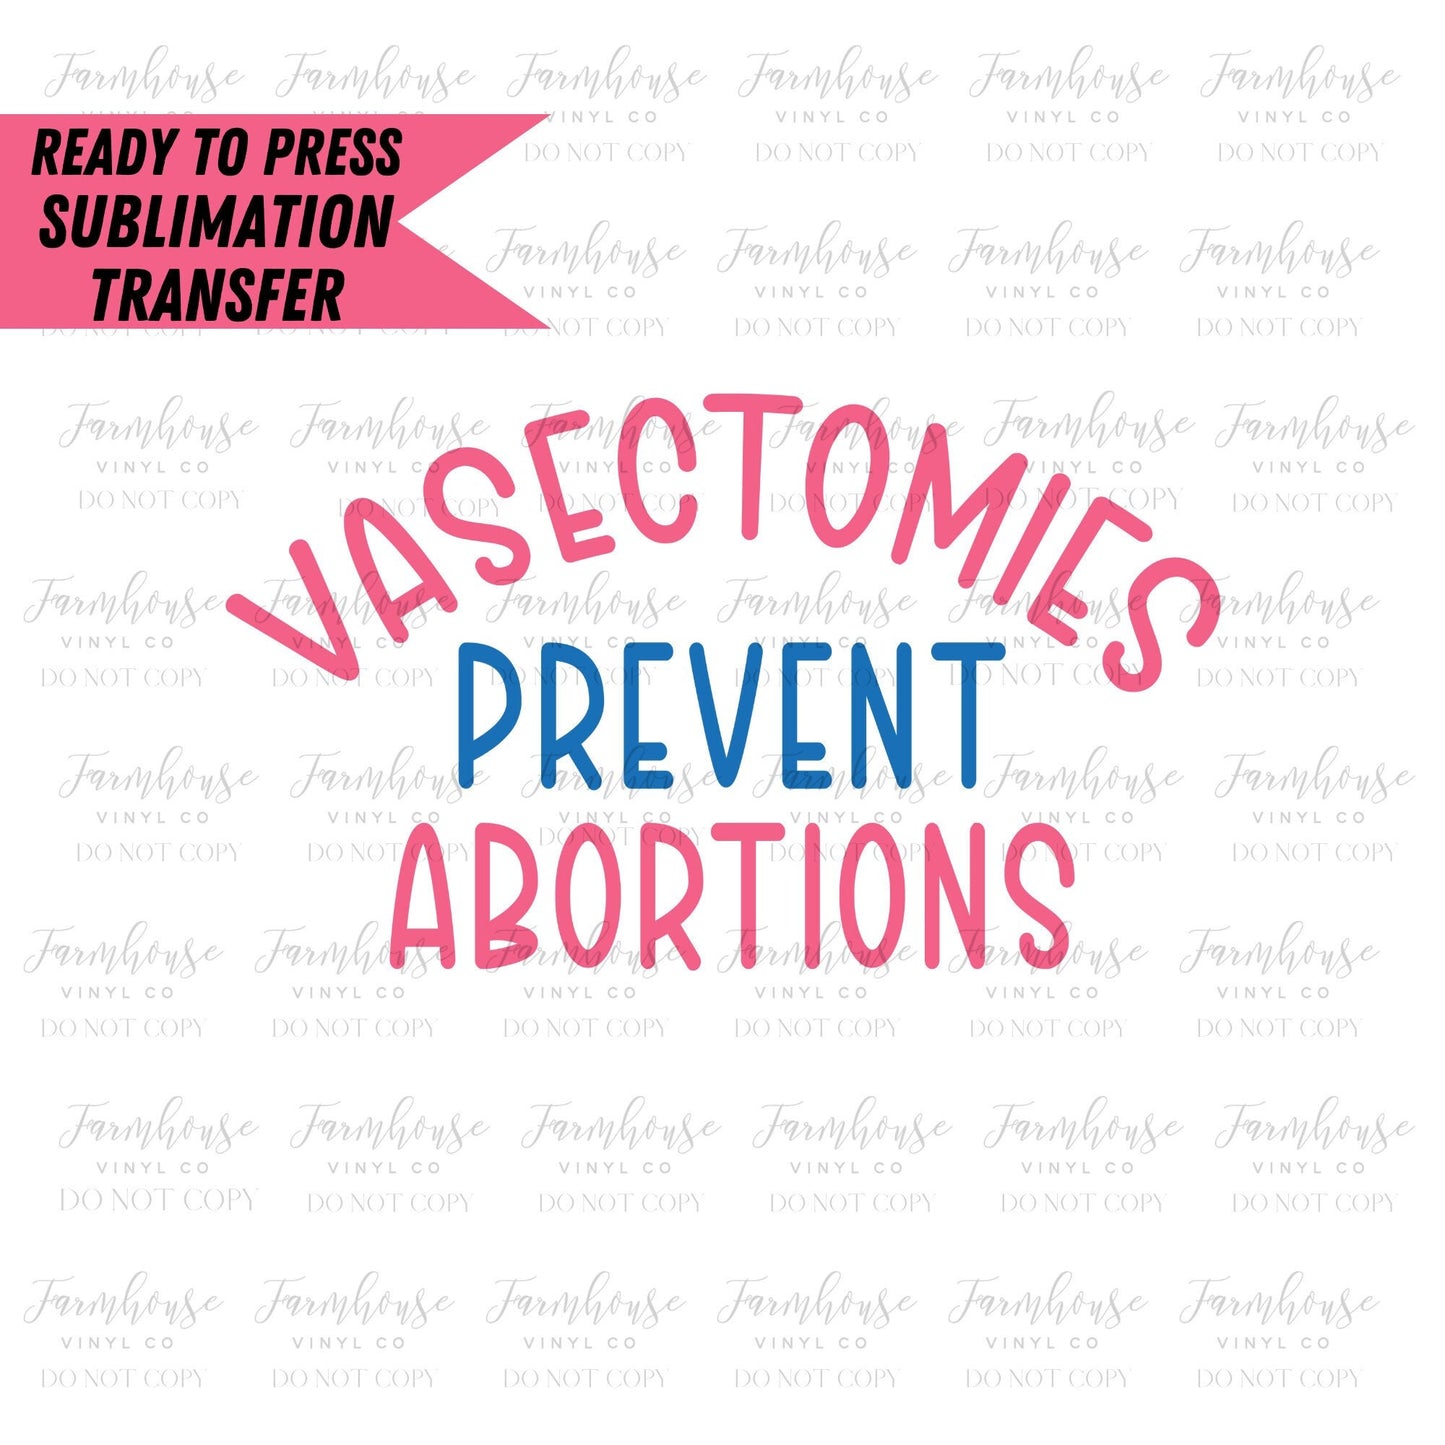 Vasectomies Prevent Abortions, Ready To Press, Sublimation Transfers, Sublimation Print, Pro Roe, Pro Choice, Women's Rights, Feminist - Farmhouse Vinyl Co